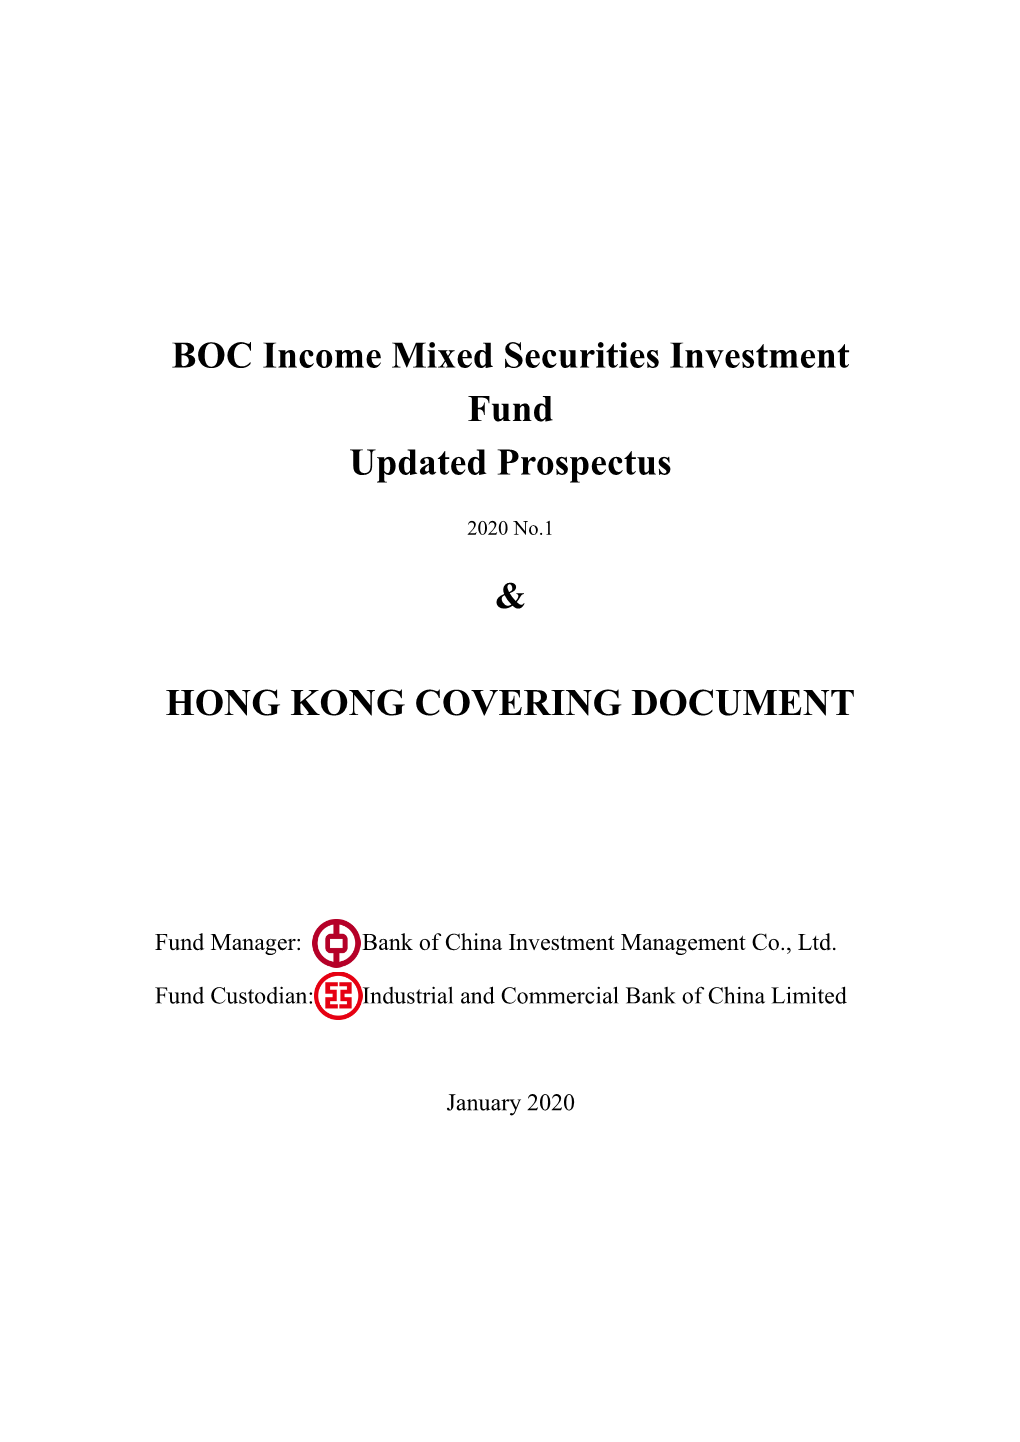 BOC Income Mixed Securities Investment Fund Updated Prospectus